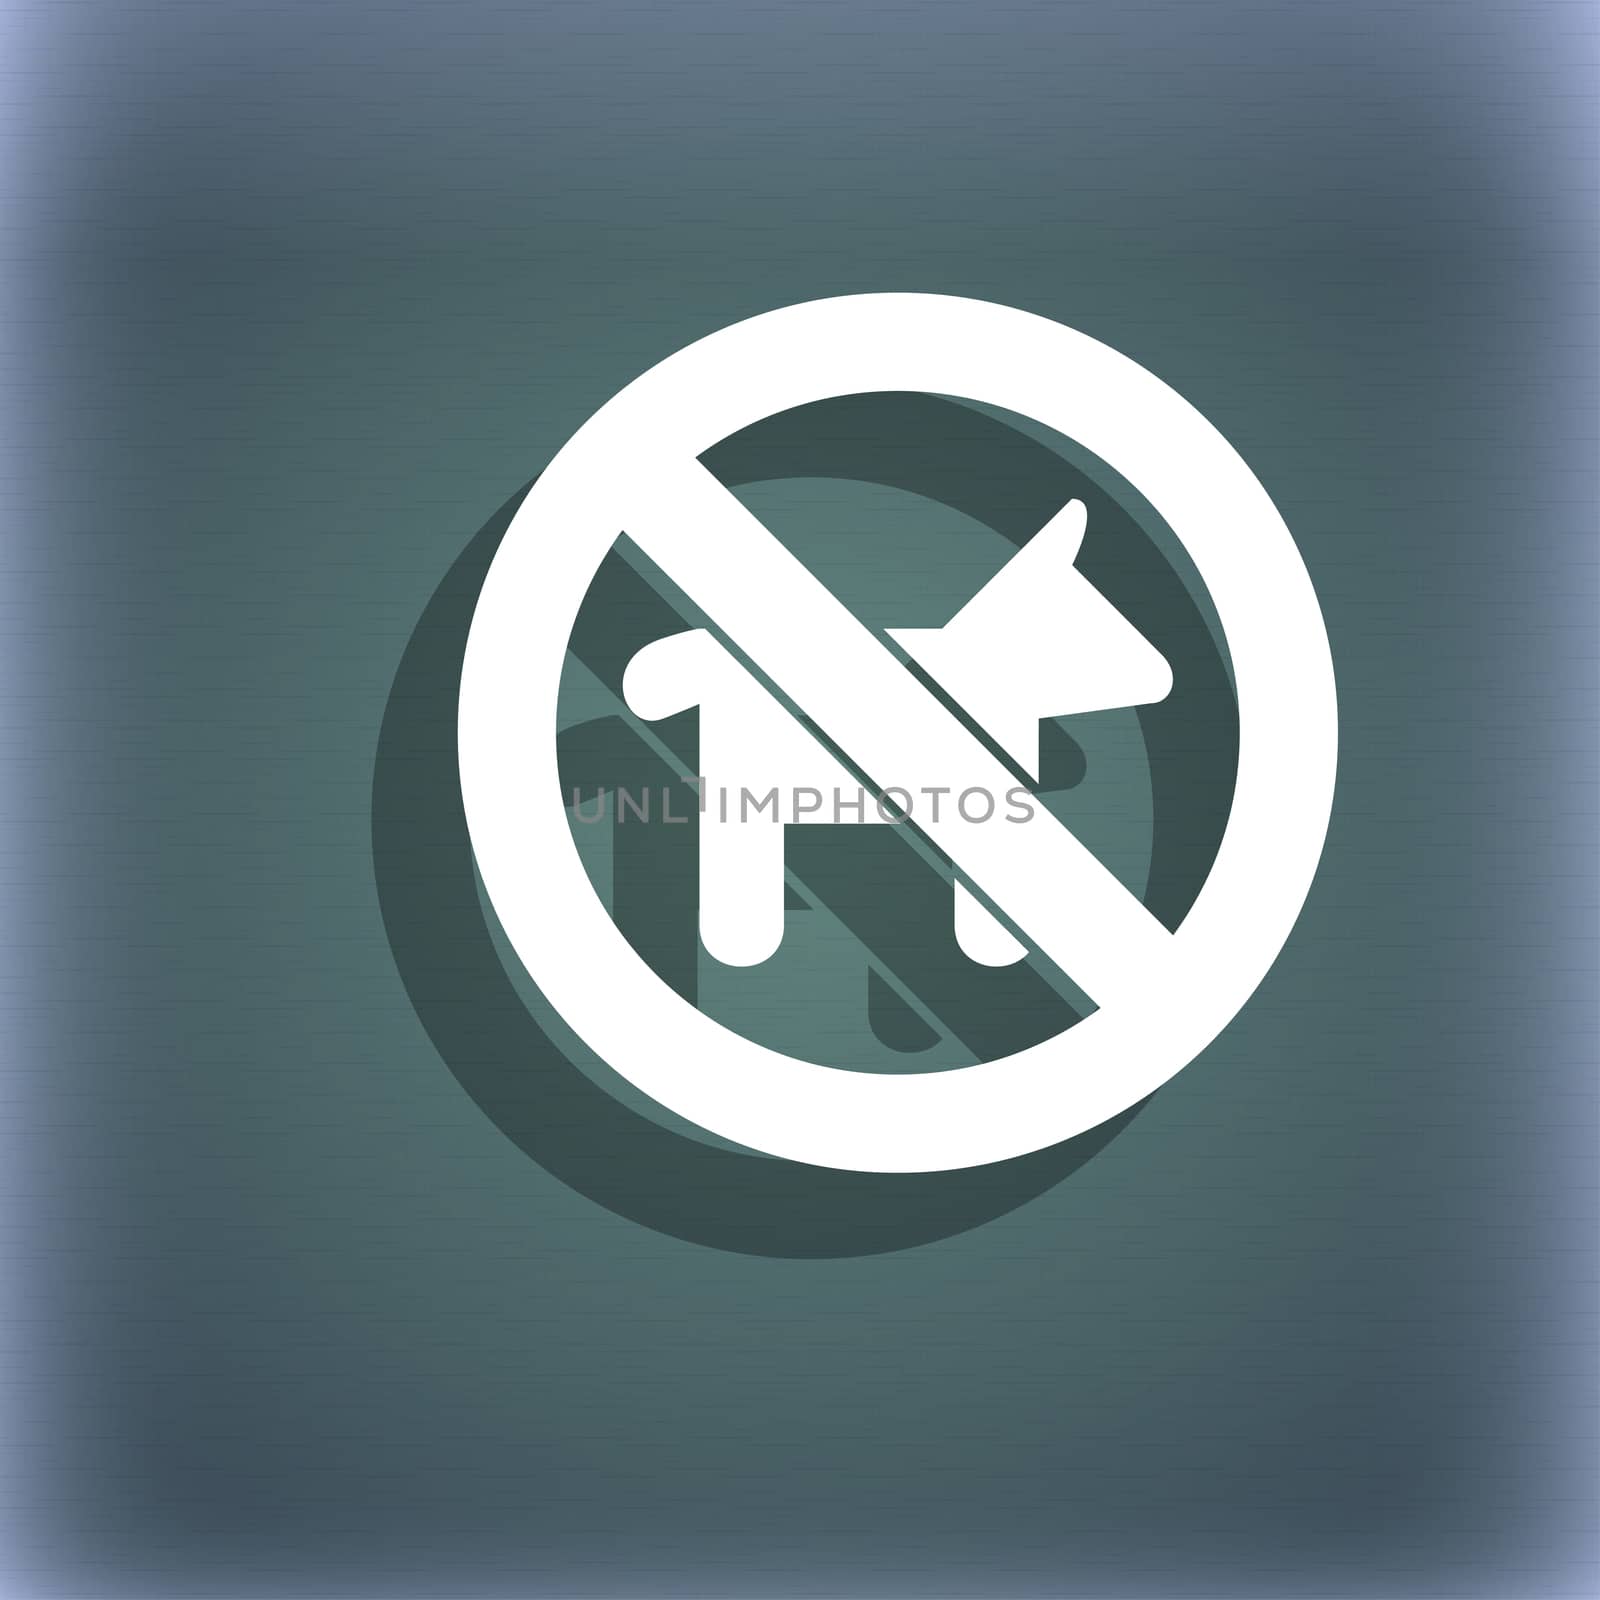 dog walking is prohibited icon symbol on the blue-green abstract background with shadow and space for your text.  by serhii_lohvyniuk